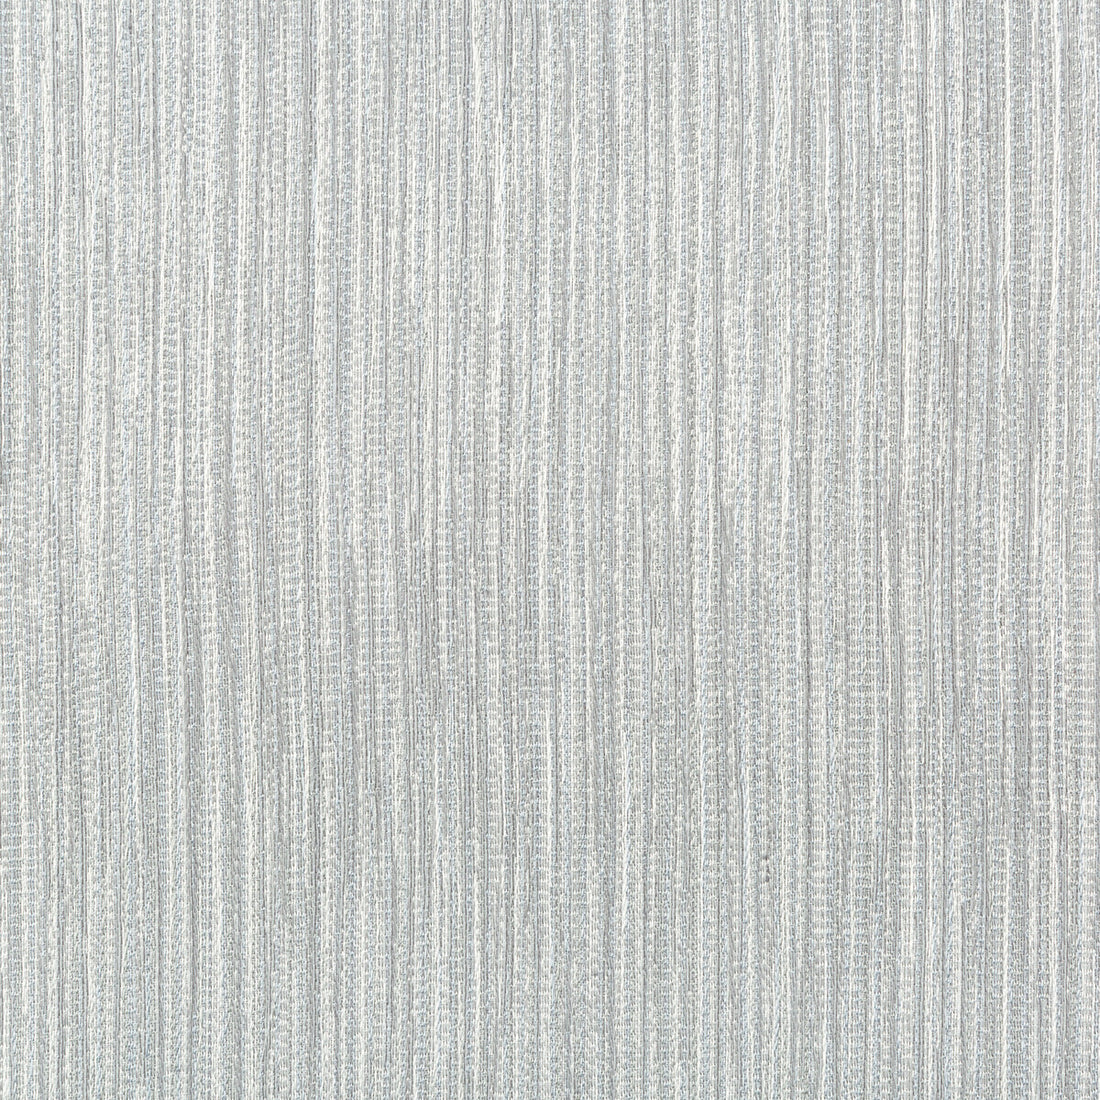 Hang Out fabric in moonstone color - pattern 4778.11.0 - by Kravet Contract in the Kravet Cruise collection